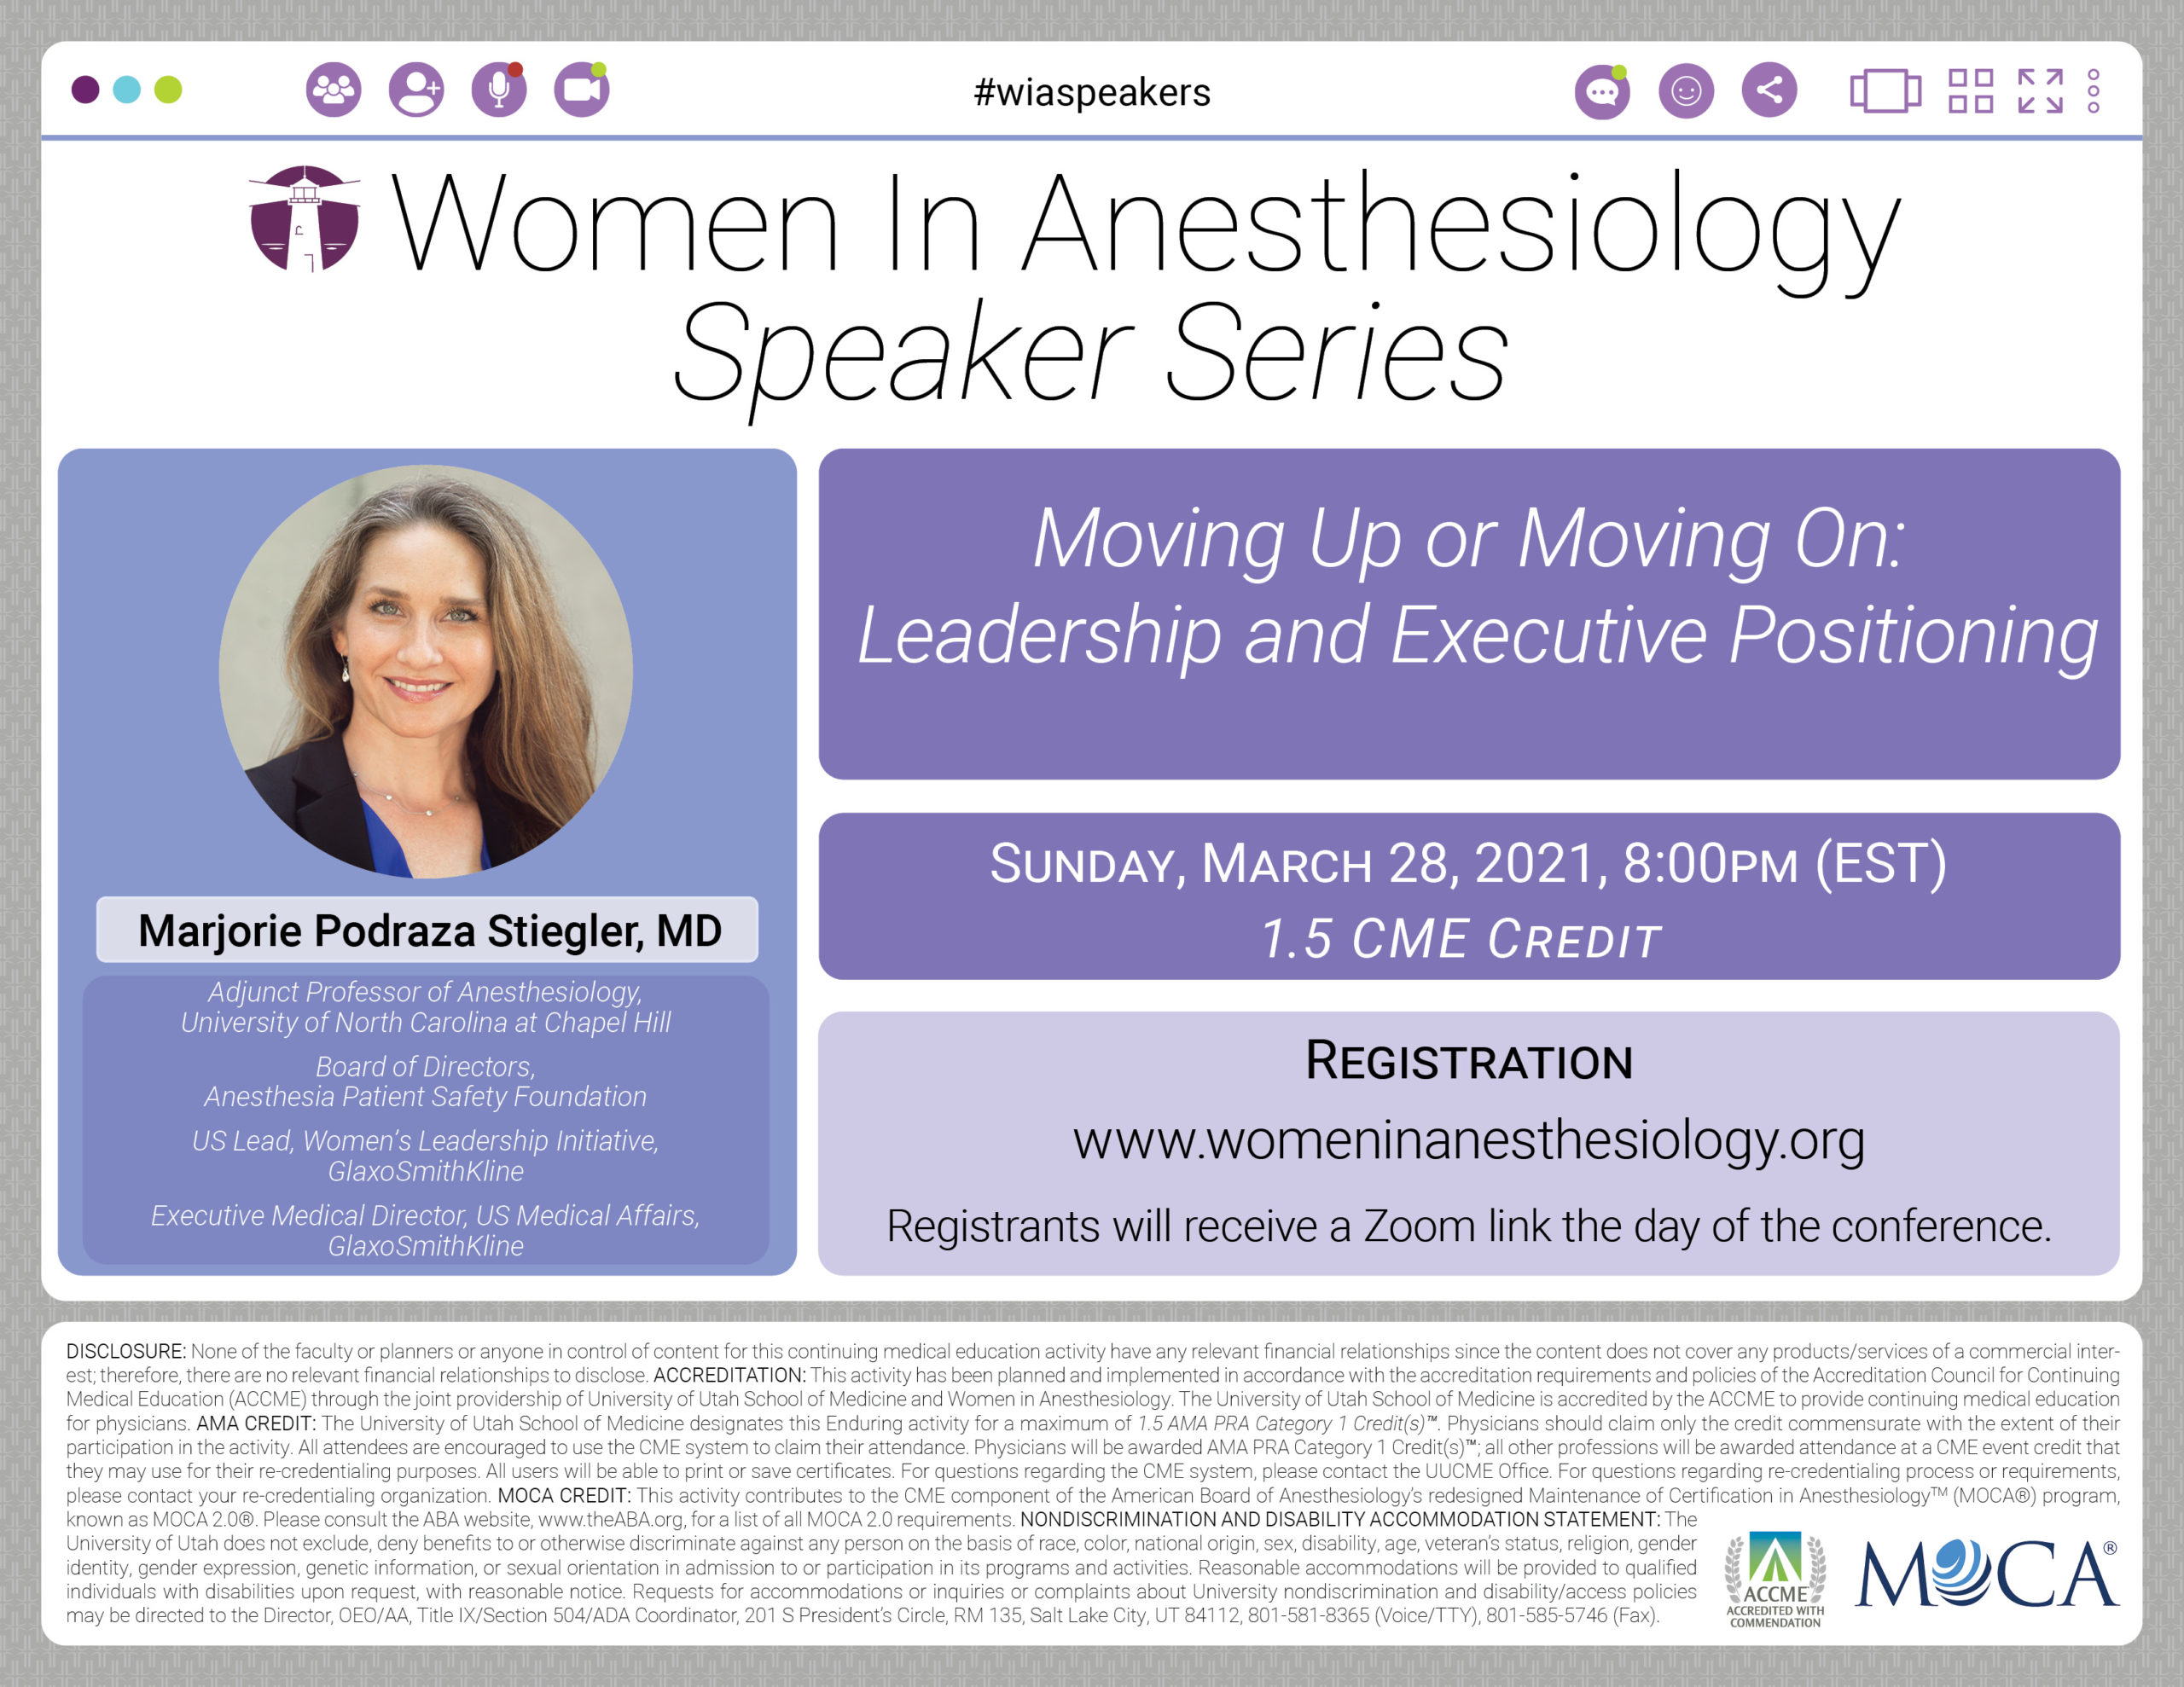 WIA Speaker Series - Marjorie Podraza Stiegler - Moving Up or Moving On: Leadership and Executive Positioning